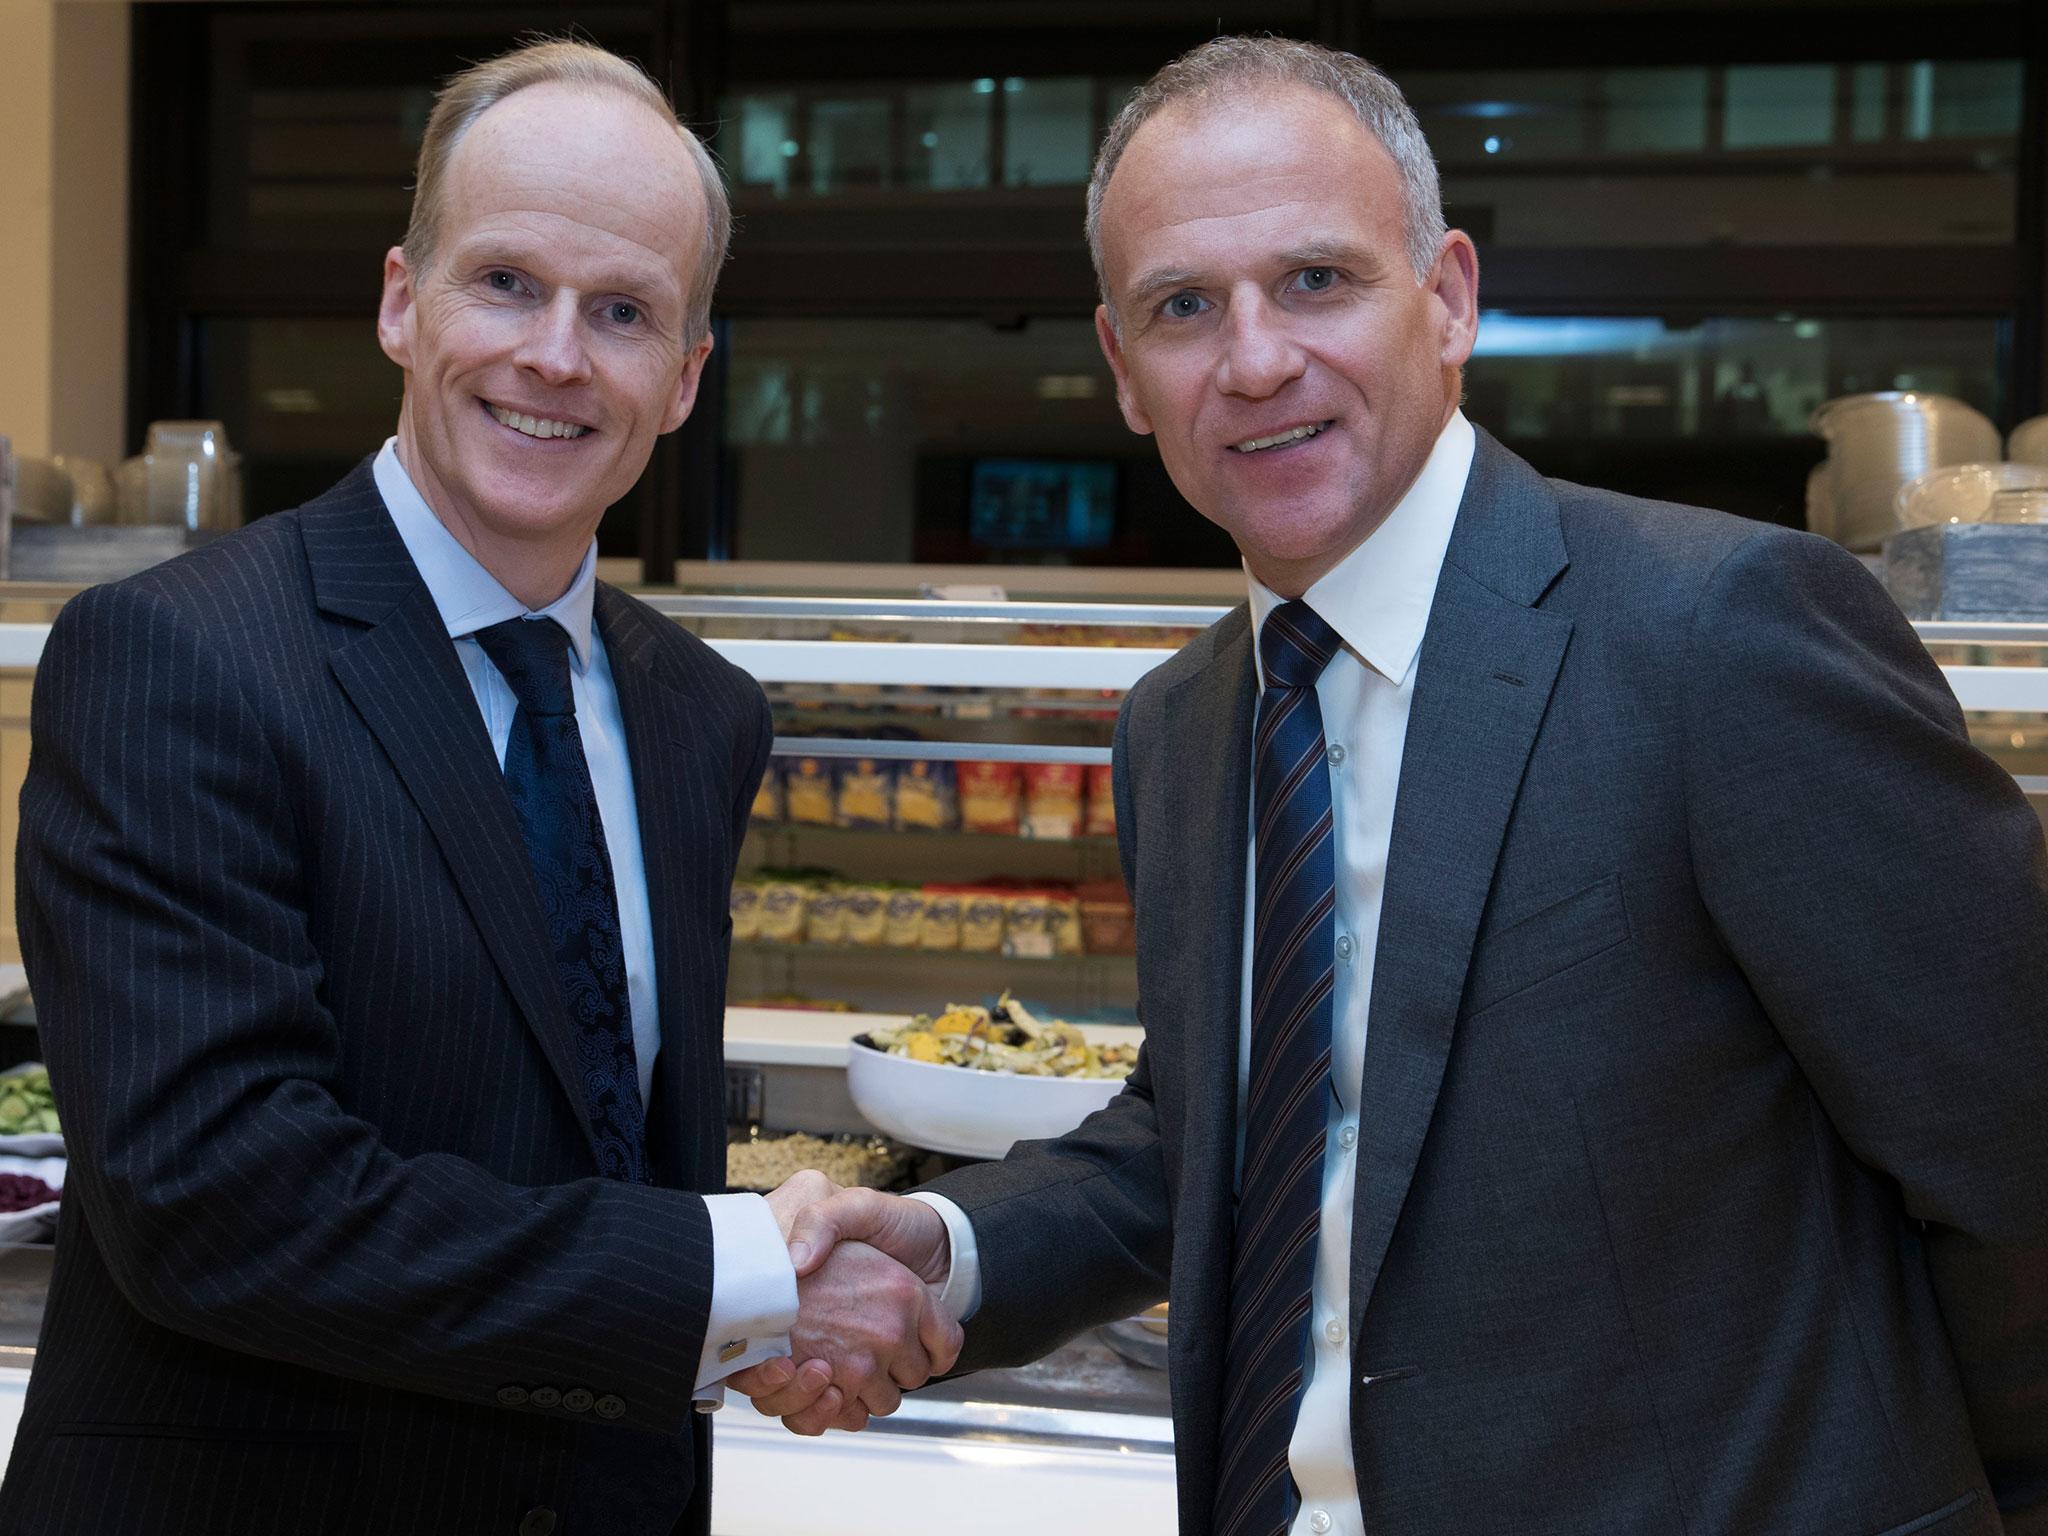 Tesco boss David Lewis and his opposite number at Booker Charles Wilson